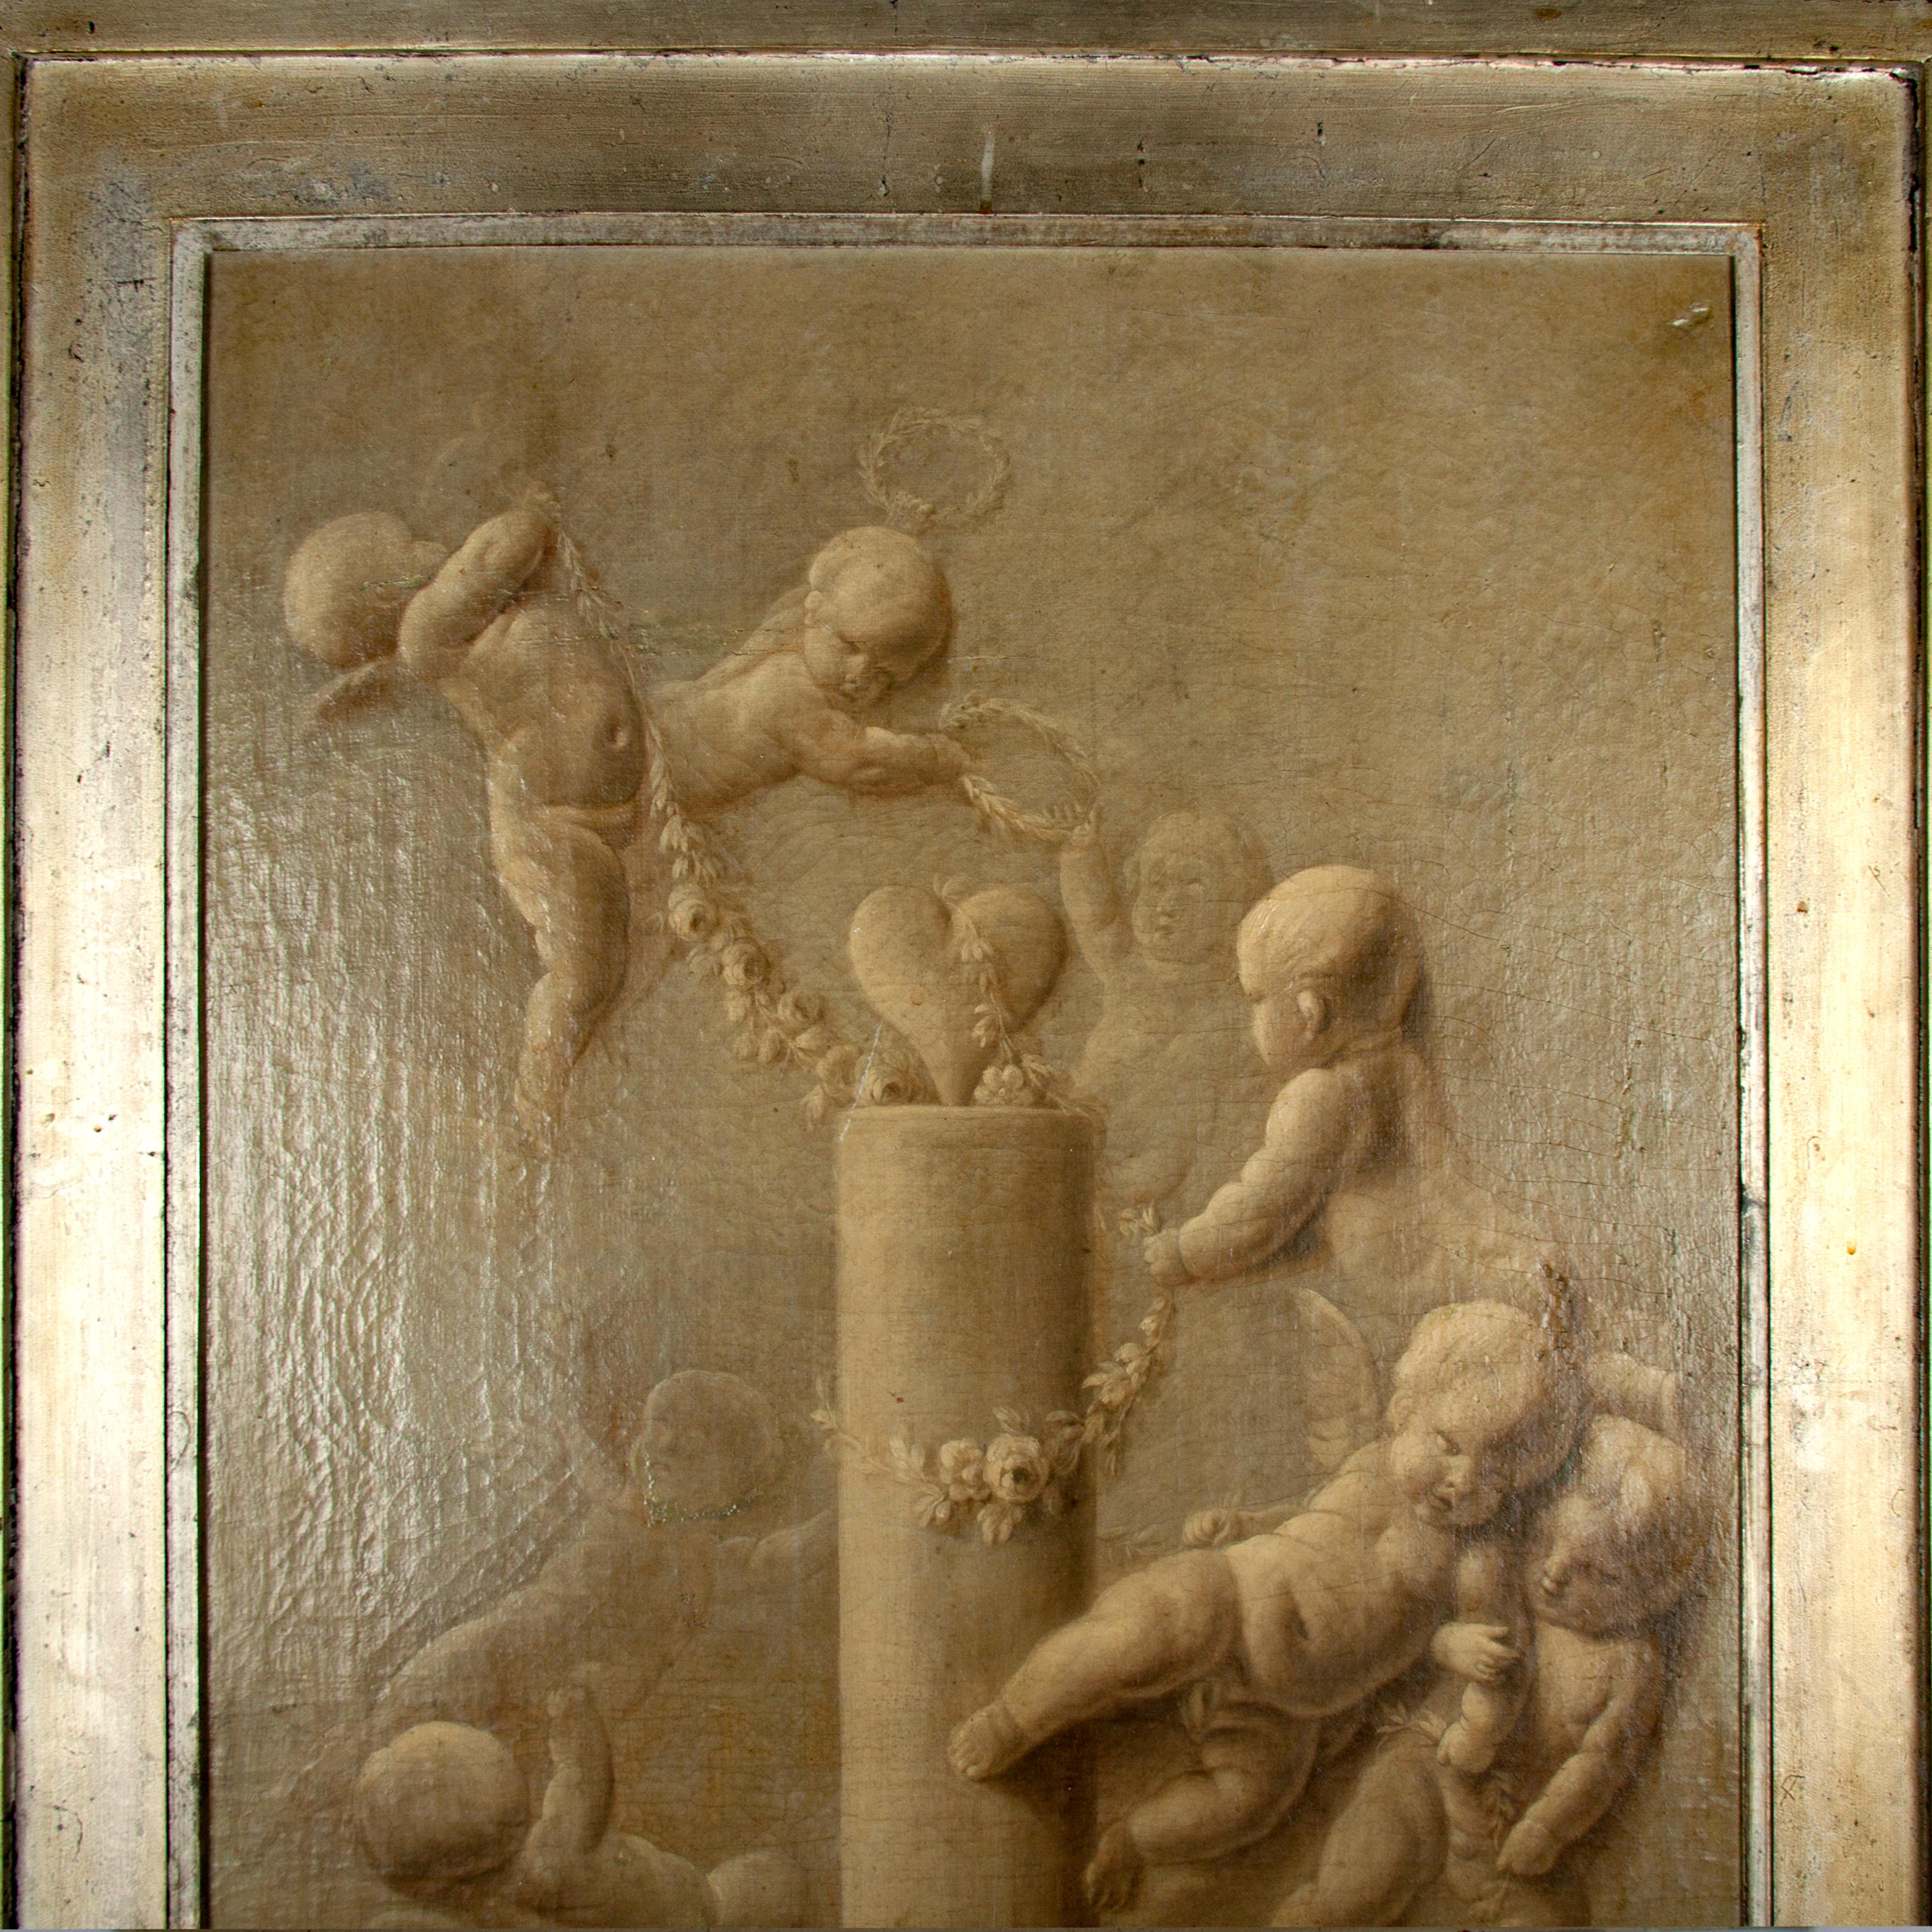 Depicting playing putti
Southern Netherlands
18th century
Oil on canvas.